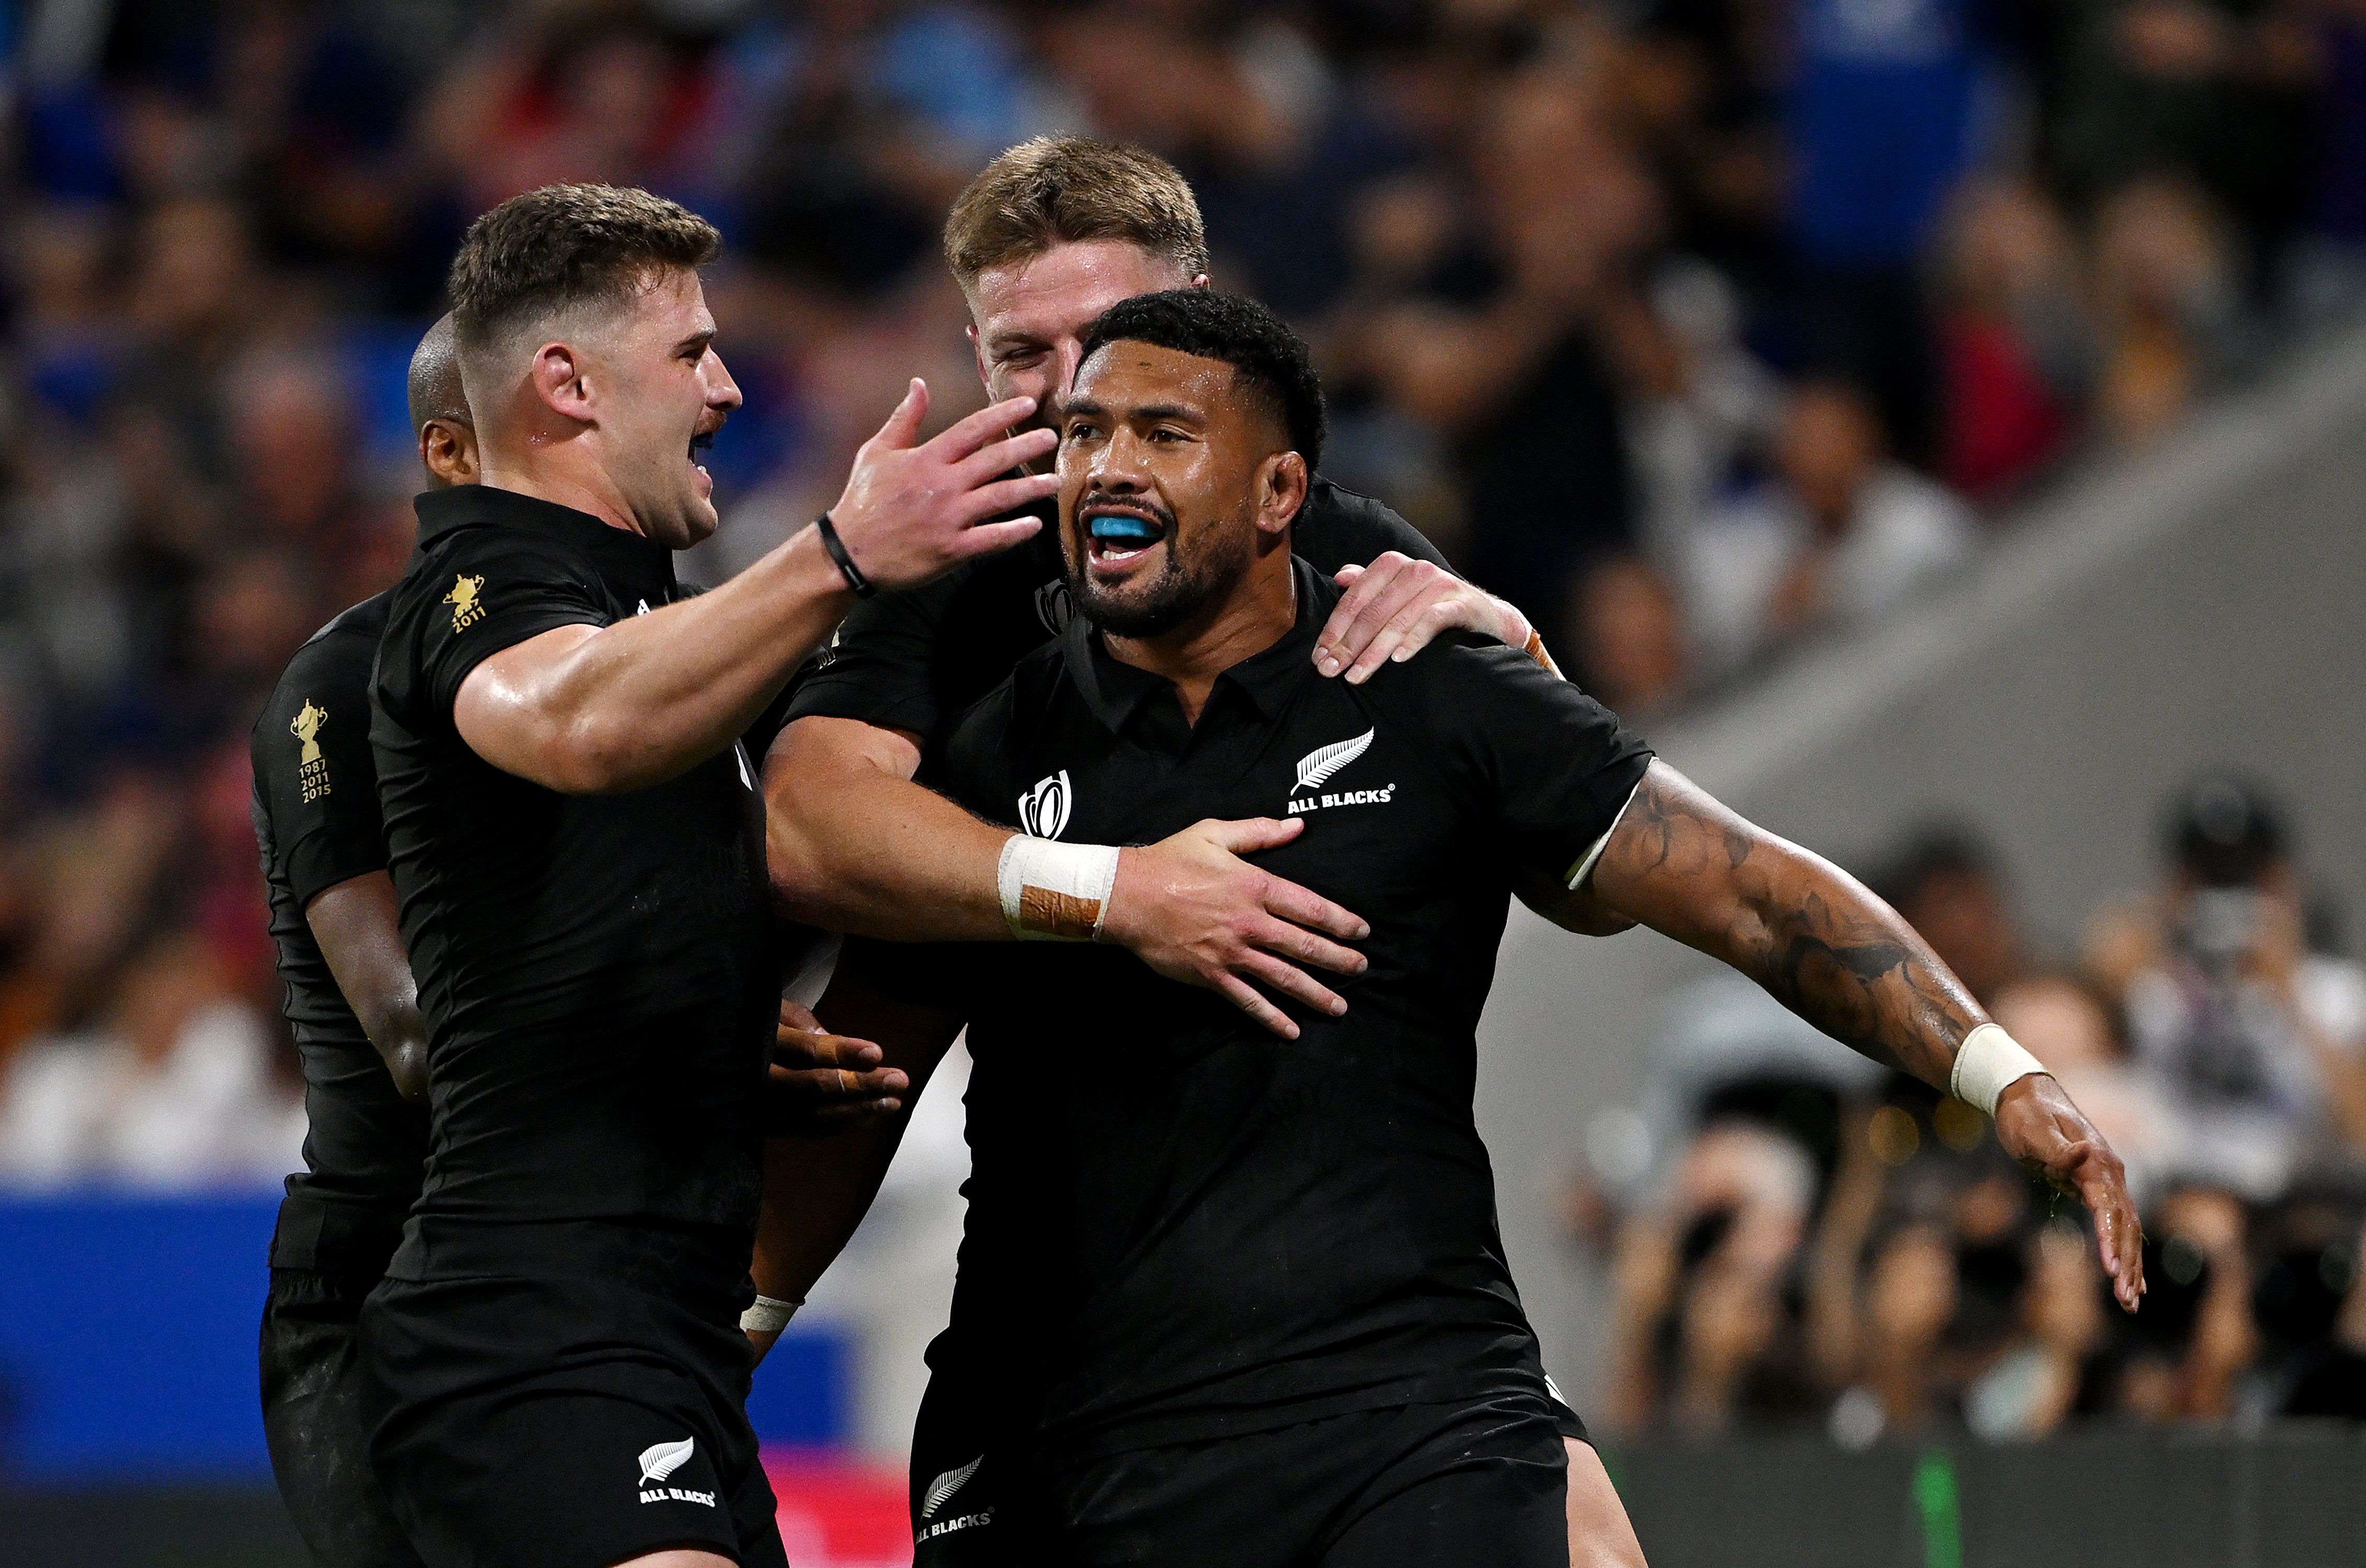 Ardie Savea has been one of the stars of the Rugby World Cup